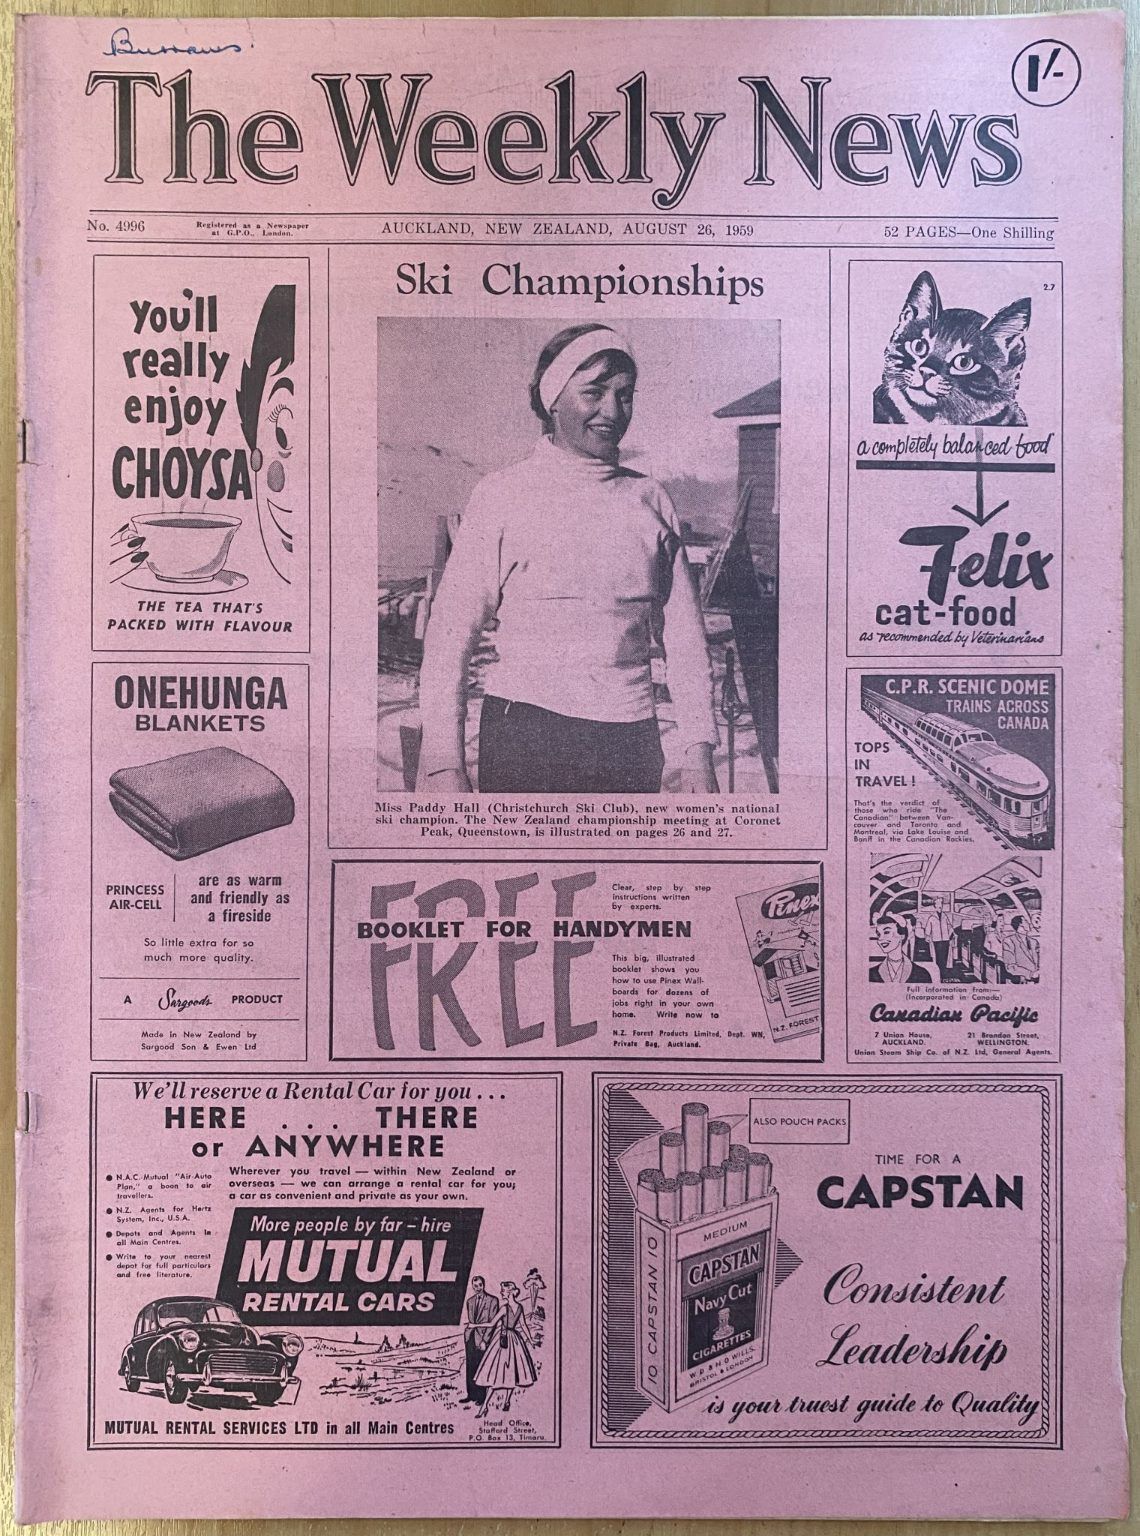 OLD NEWSPAPER: The Weekly News - No. 4996, 26 August 1959